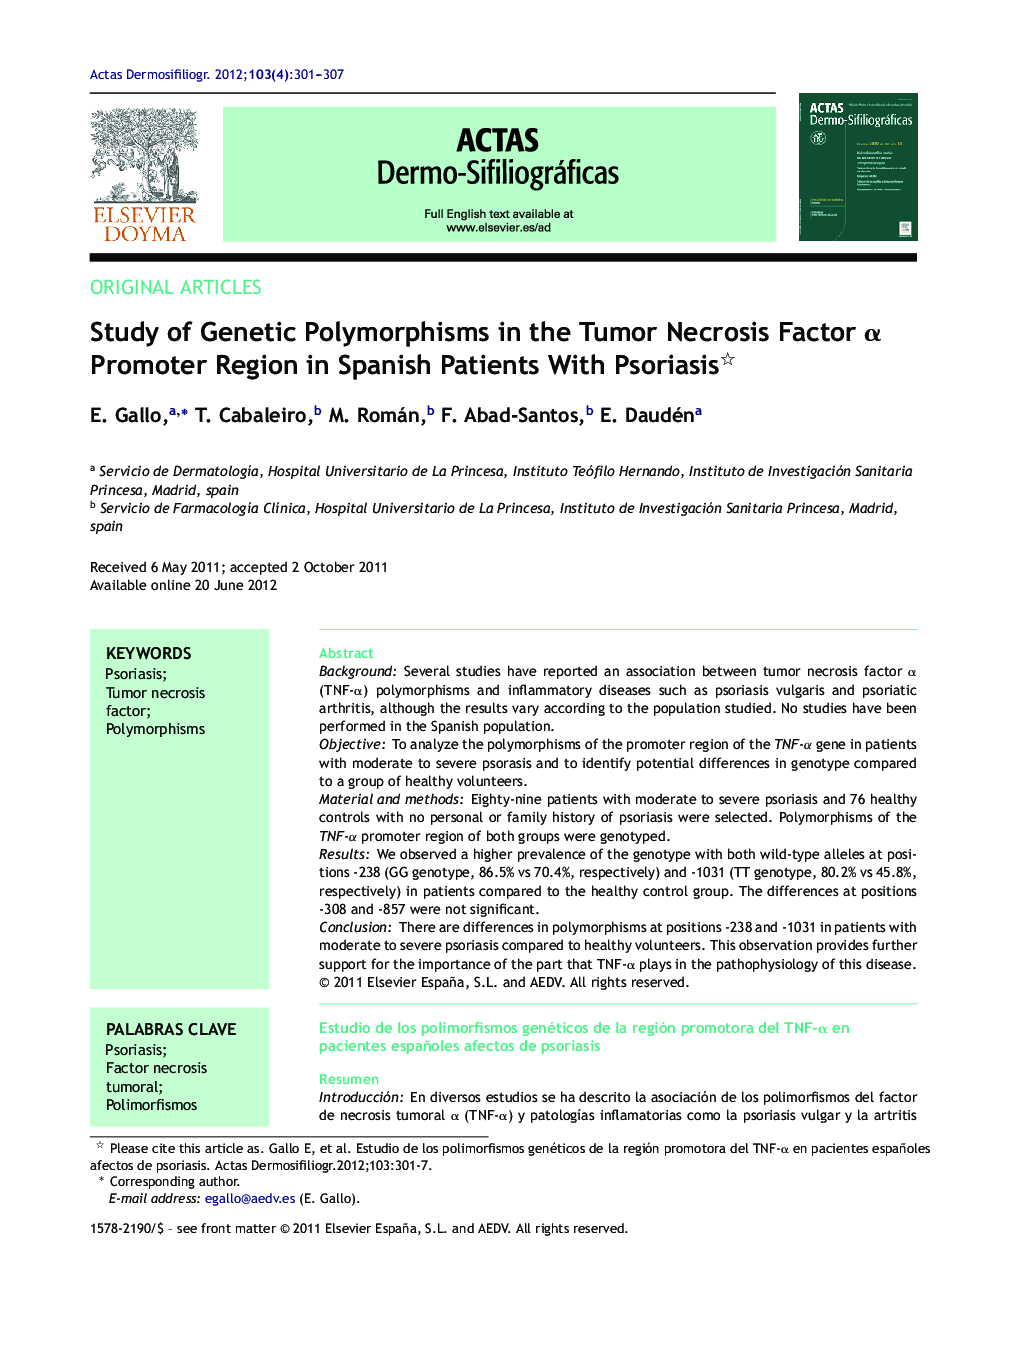 Study of Genetic Polymorphisms in the Tumor Necrosis Factor α Promoter Region in Spanish Patients With Psoriasis 